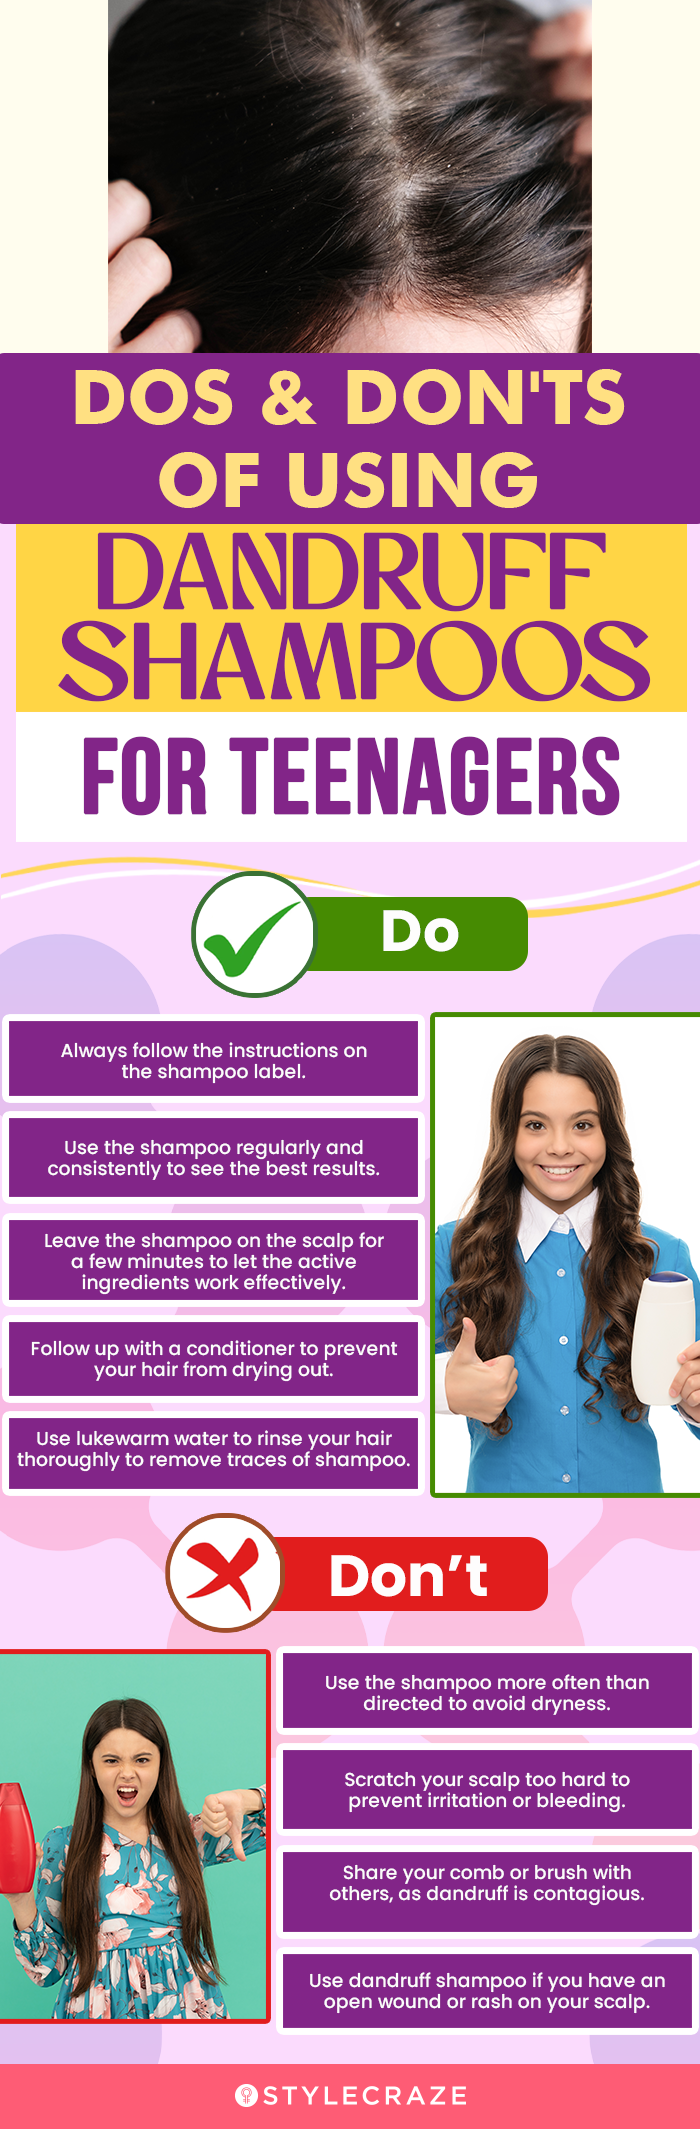 Dos & Don'ts Of Using Dandruff Shampoo For Teenagers (infographic)